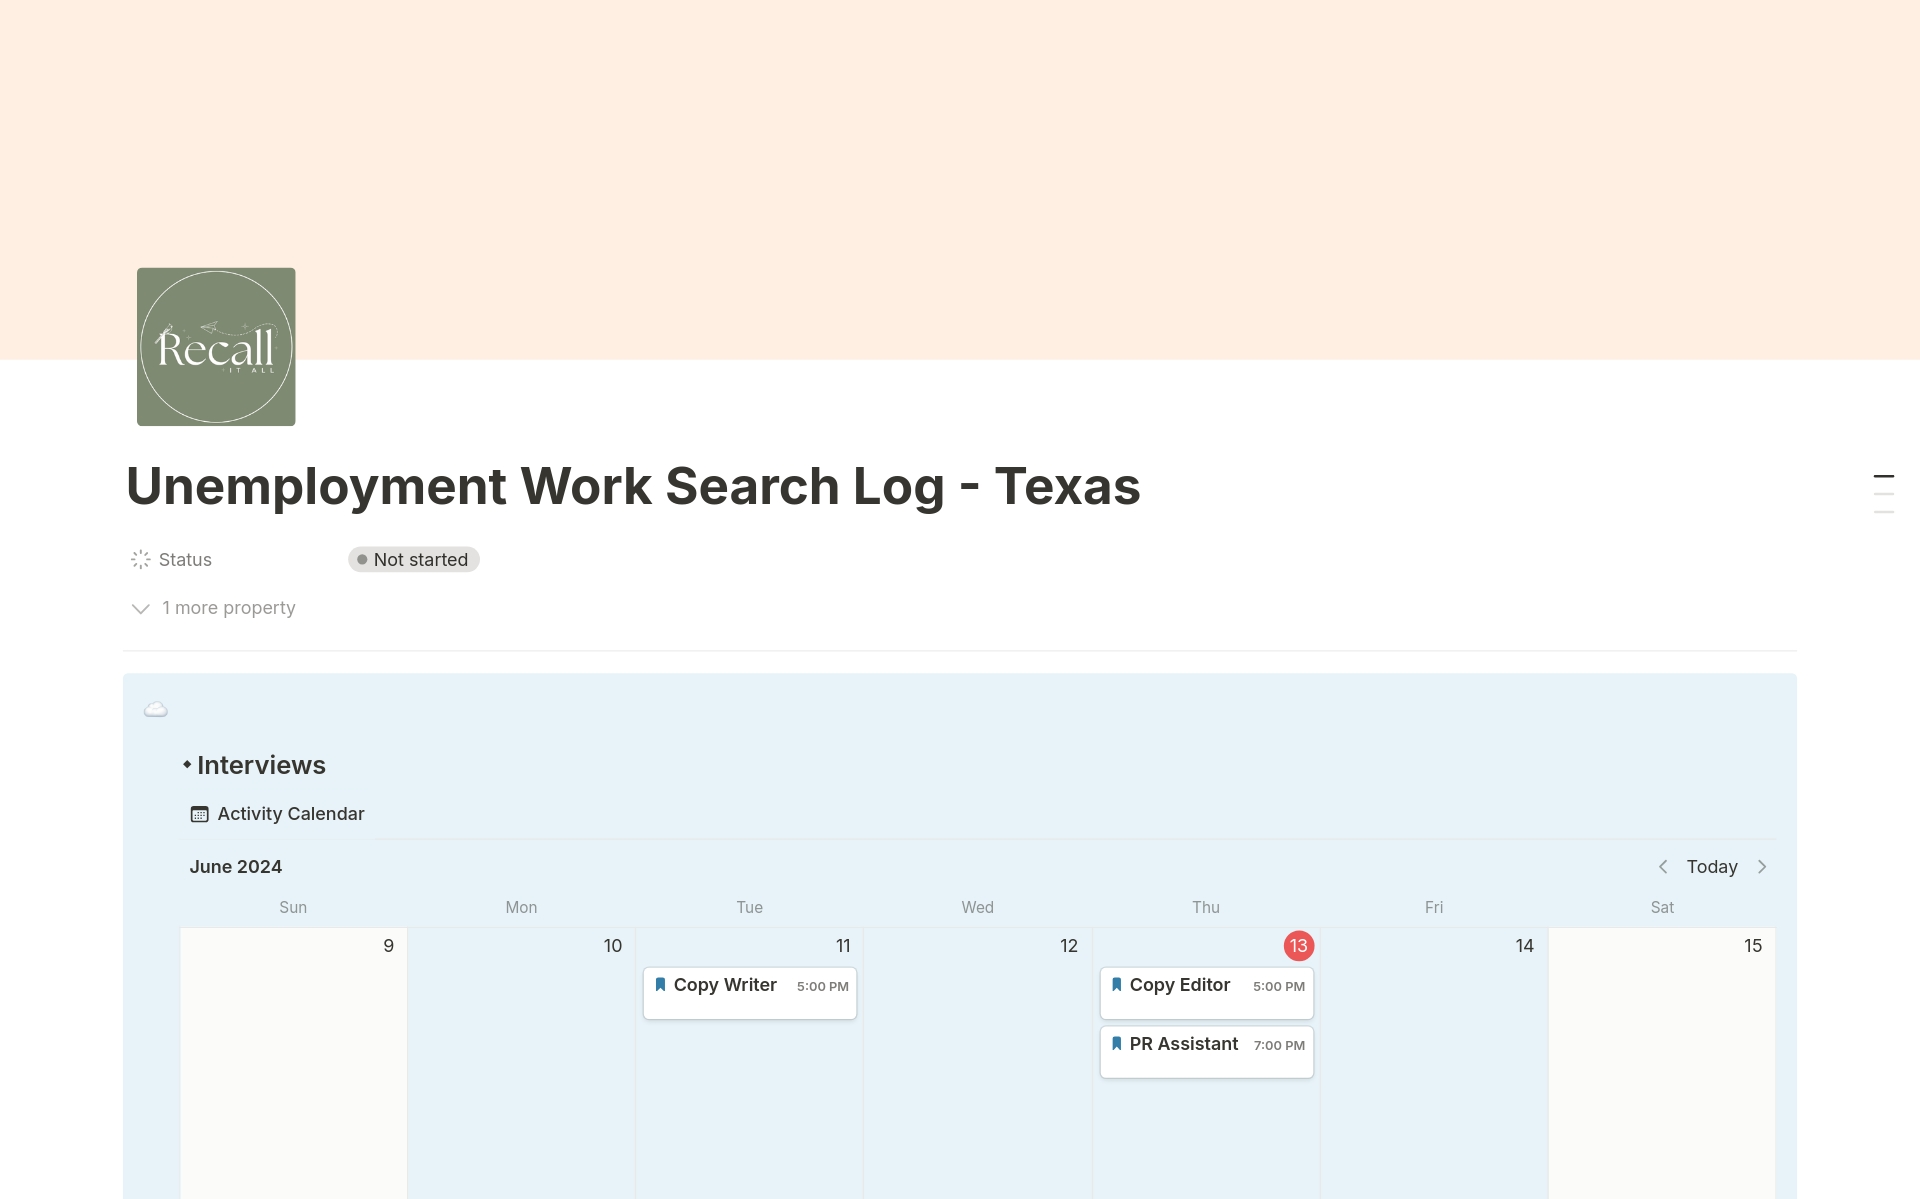 Stay organized and compliant with Texas unemployment work search activity log requirements. Record your job search activities diligently, including job applications, interviews, and networking efforts.